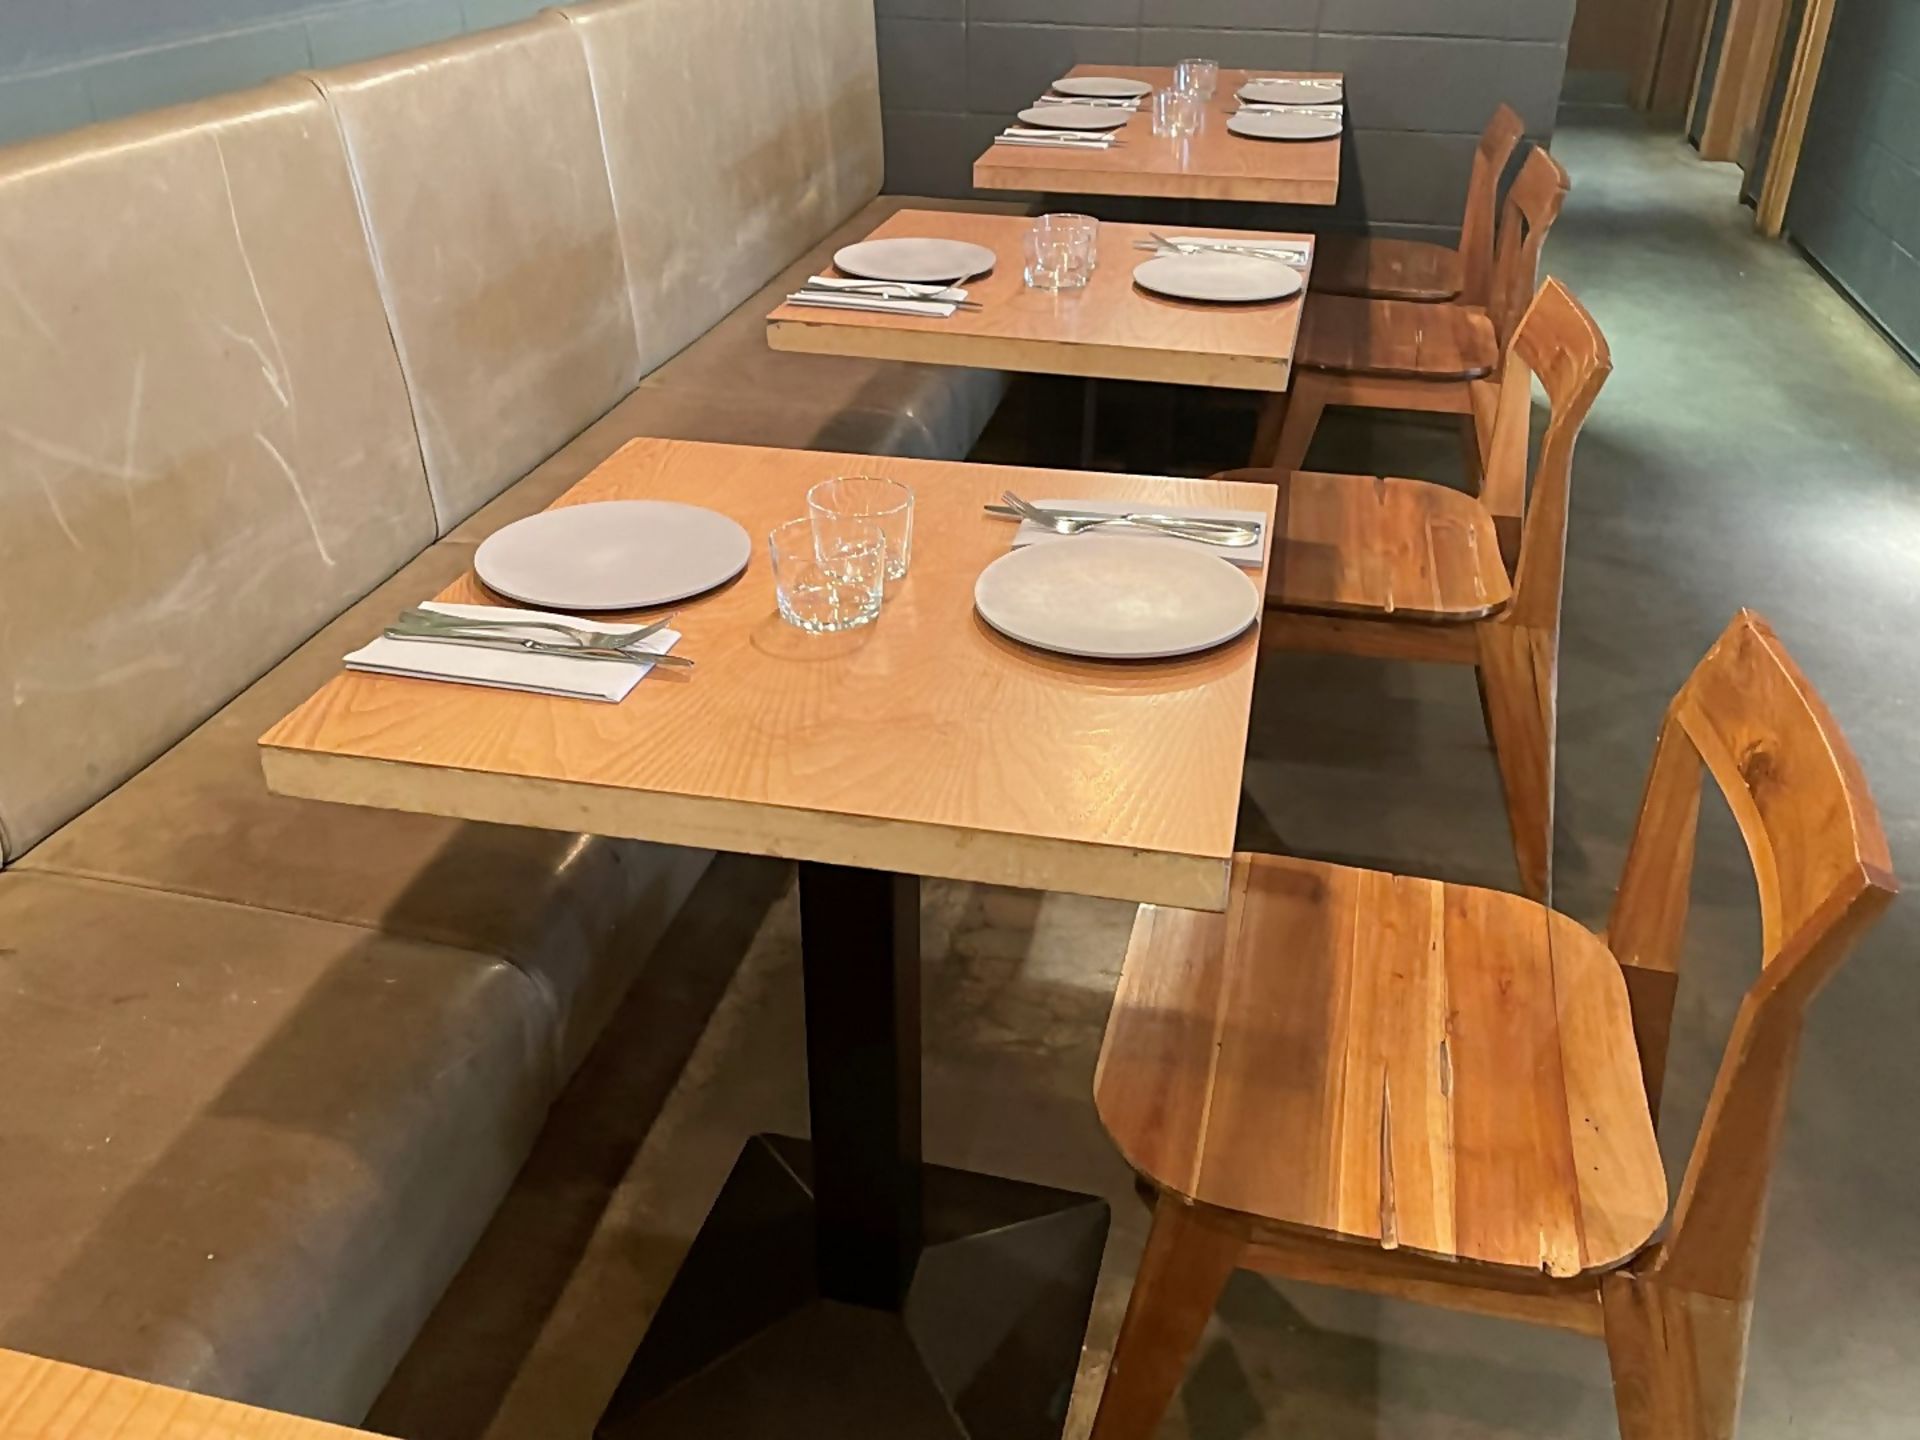 10 x Square Bistro Tables Featuring Wooden Tops And Sturdy Metal Bases - Dimensions To Follow - Ref: - Image 6 of 6